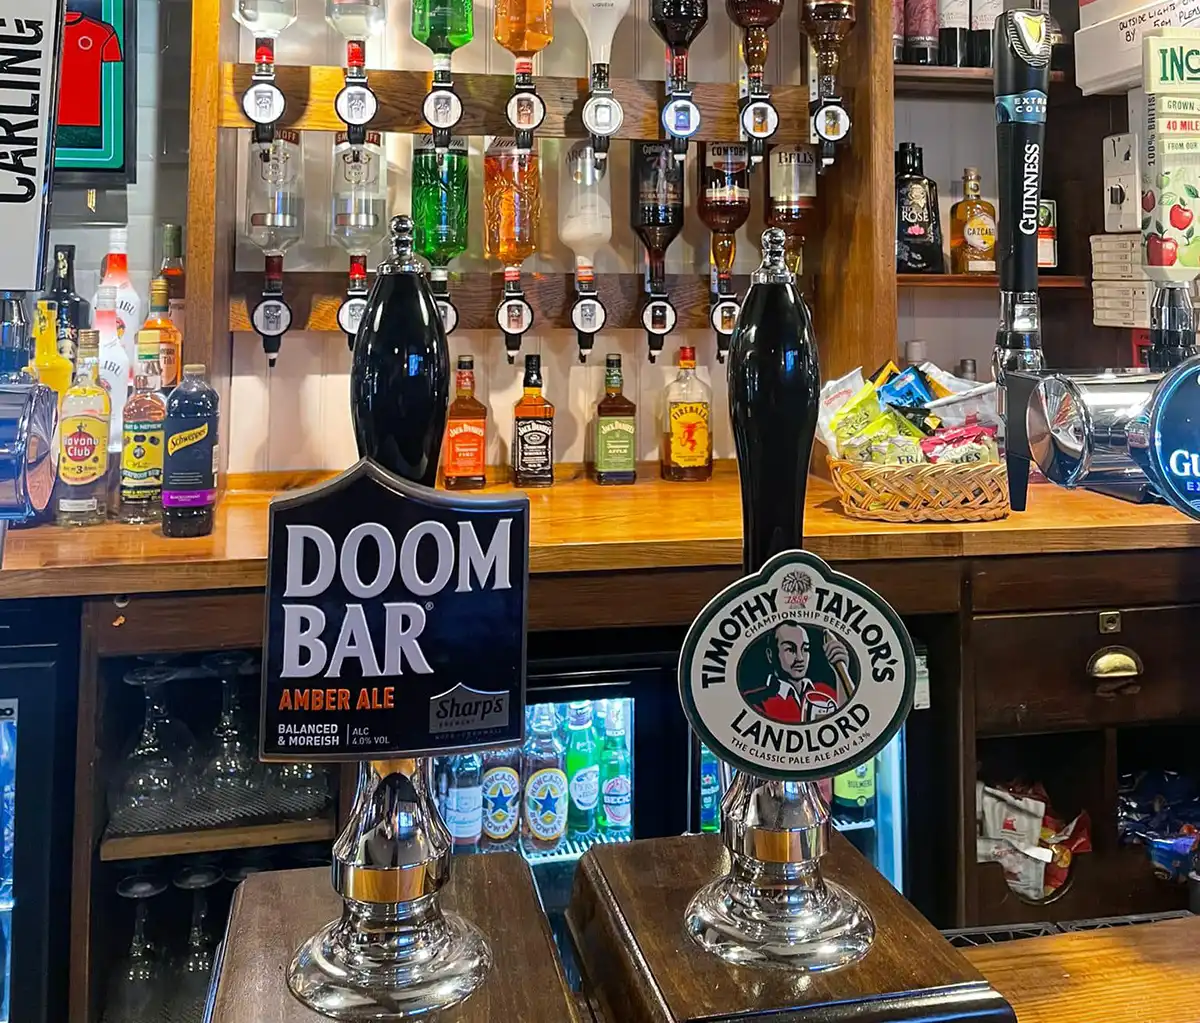 A new bar menu is also now available at The Dolphin in Blandford